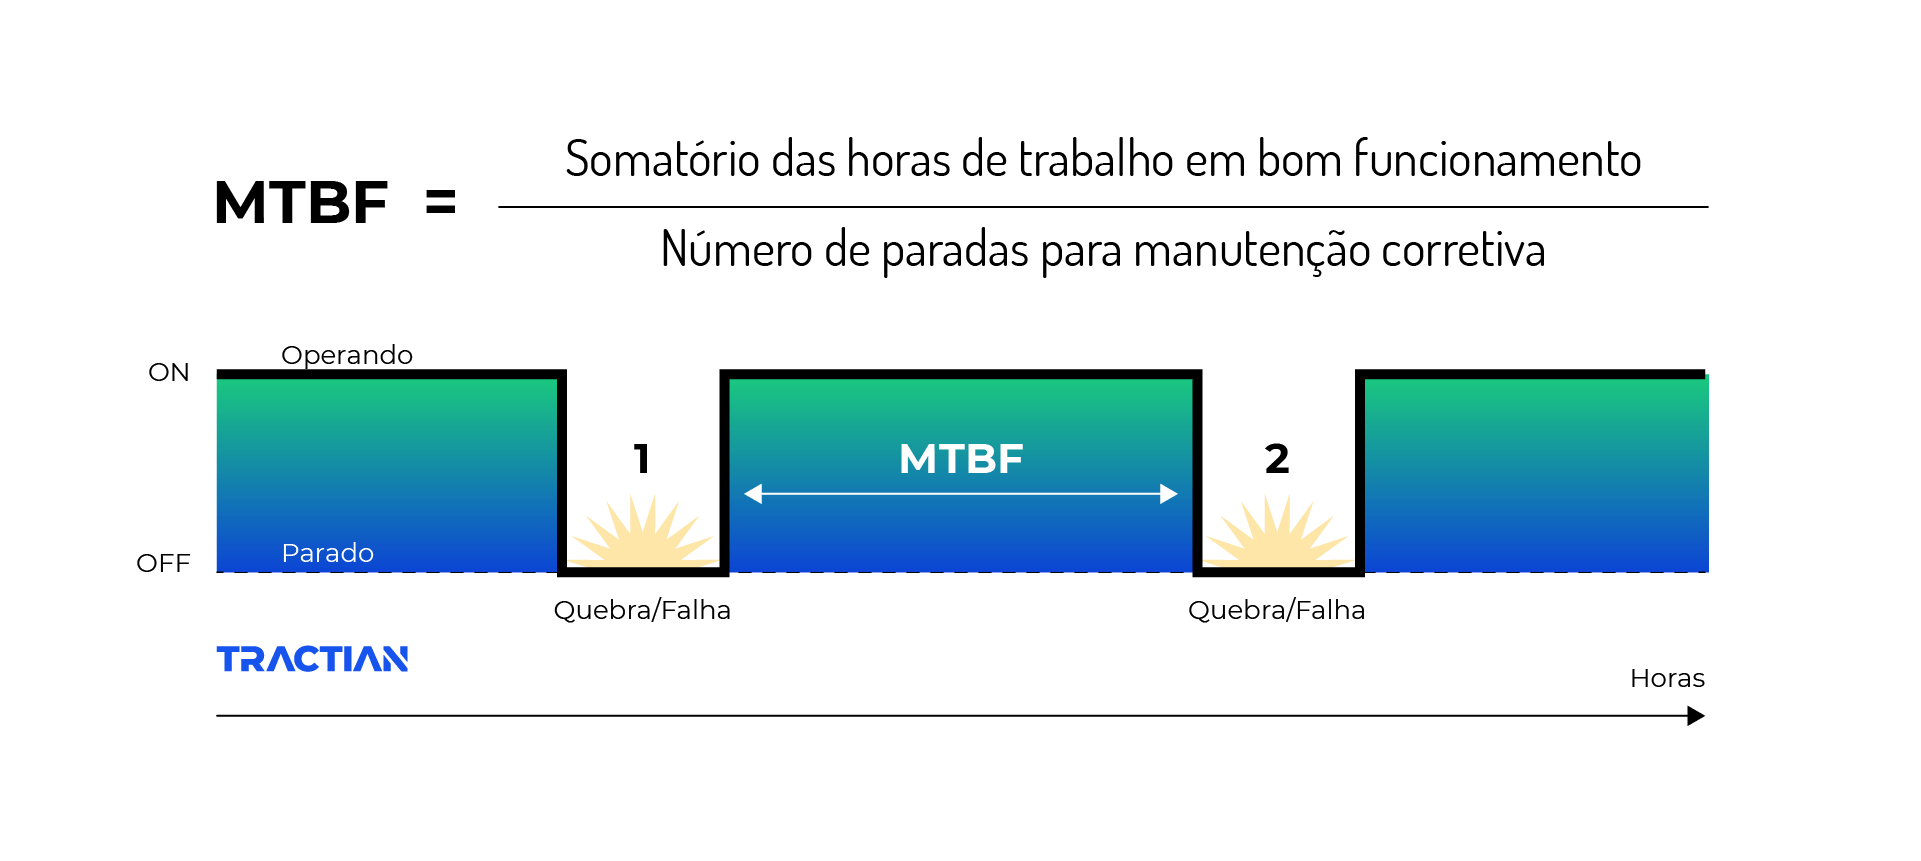 MTBF (Mean Time Between Failures)